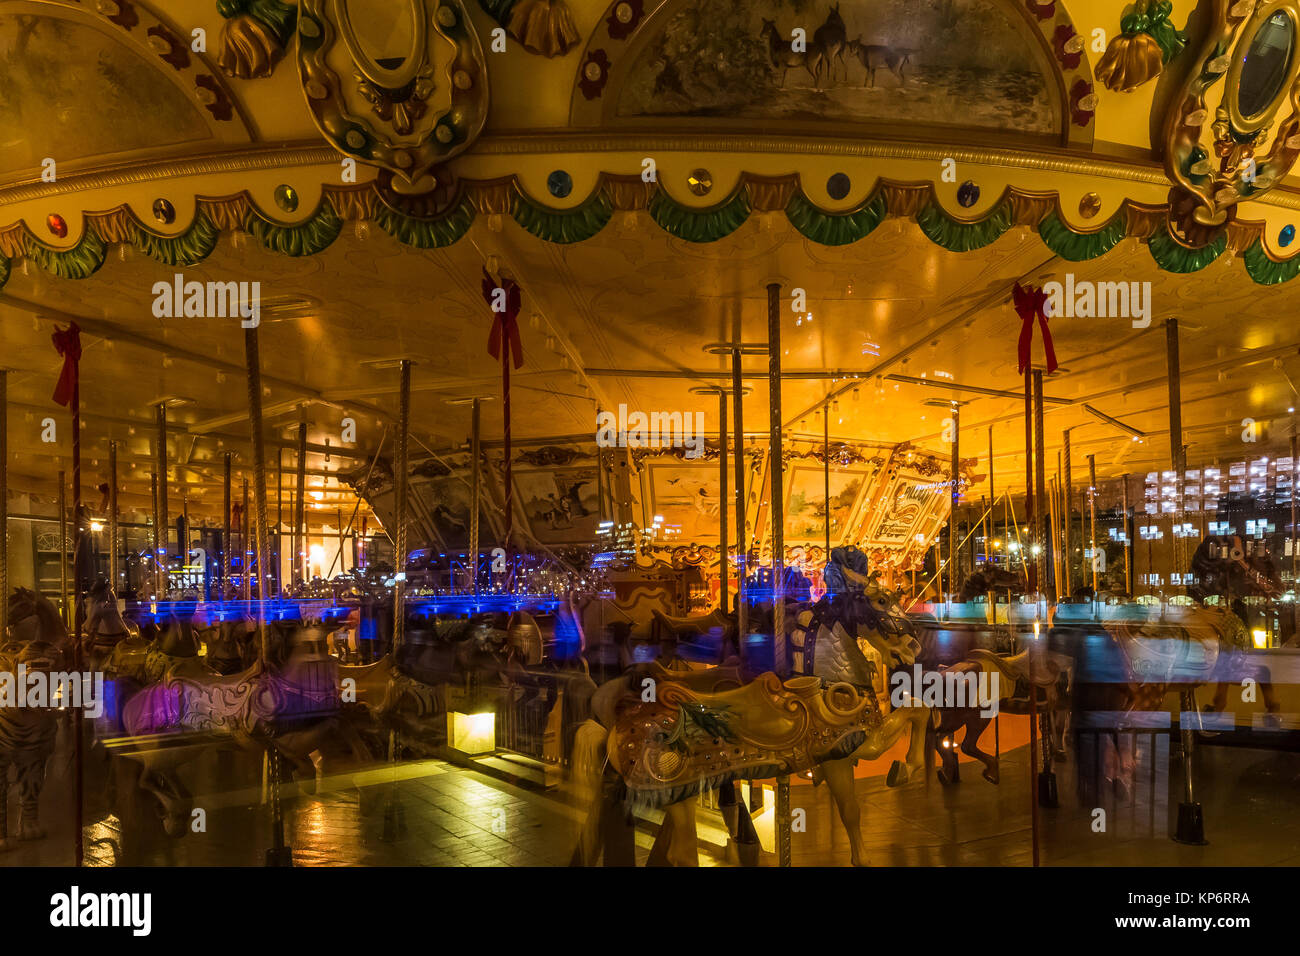 1928 Spillman Carousel in the Grand Rapids Public Museum viewed from outside at night near the Grand River in Grand Rapids, Michigan, USA Stock Photo